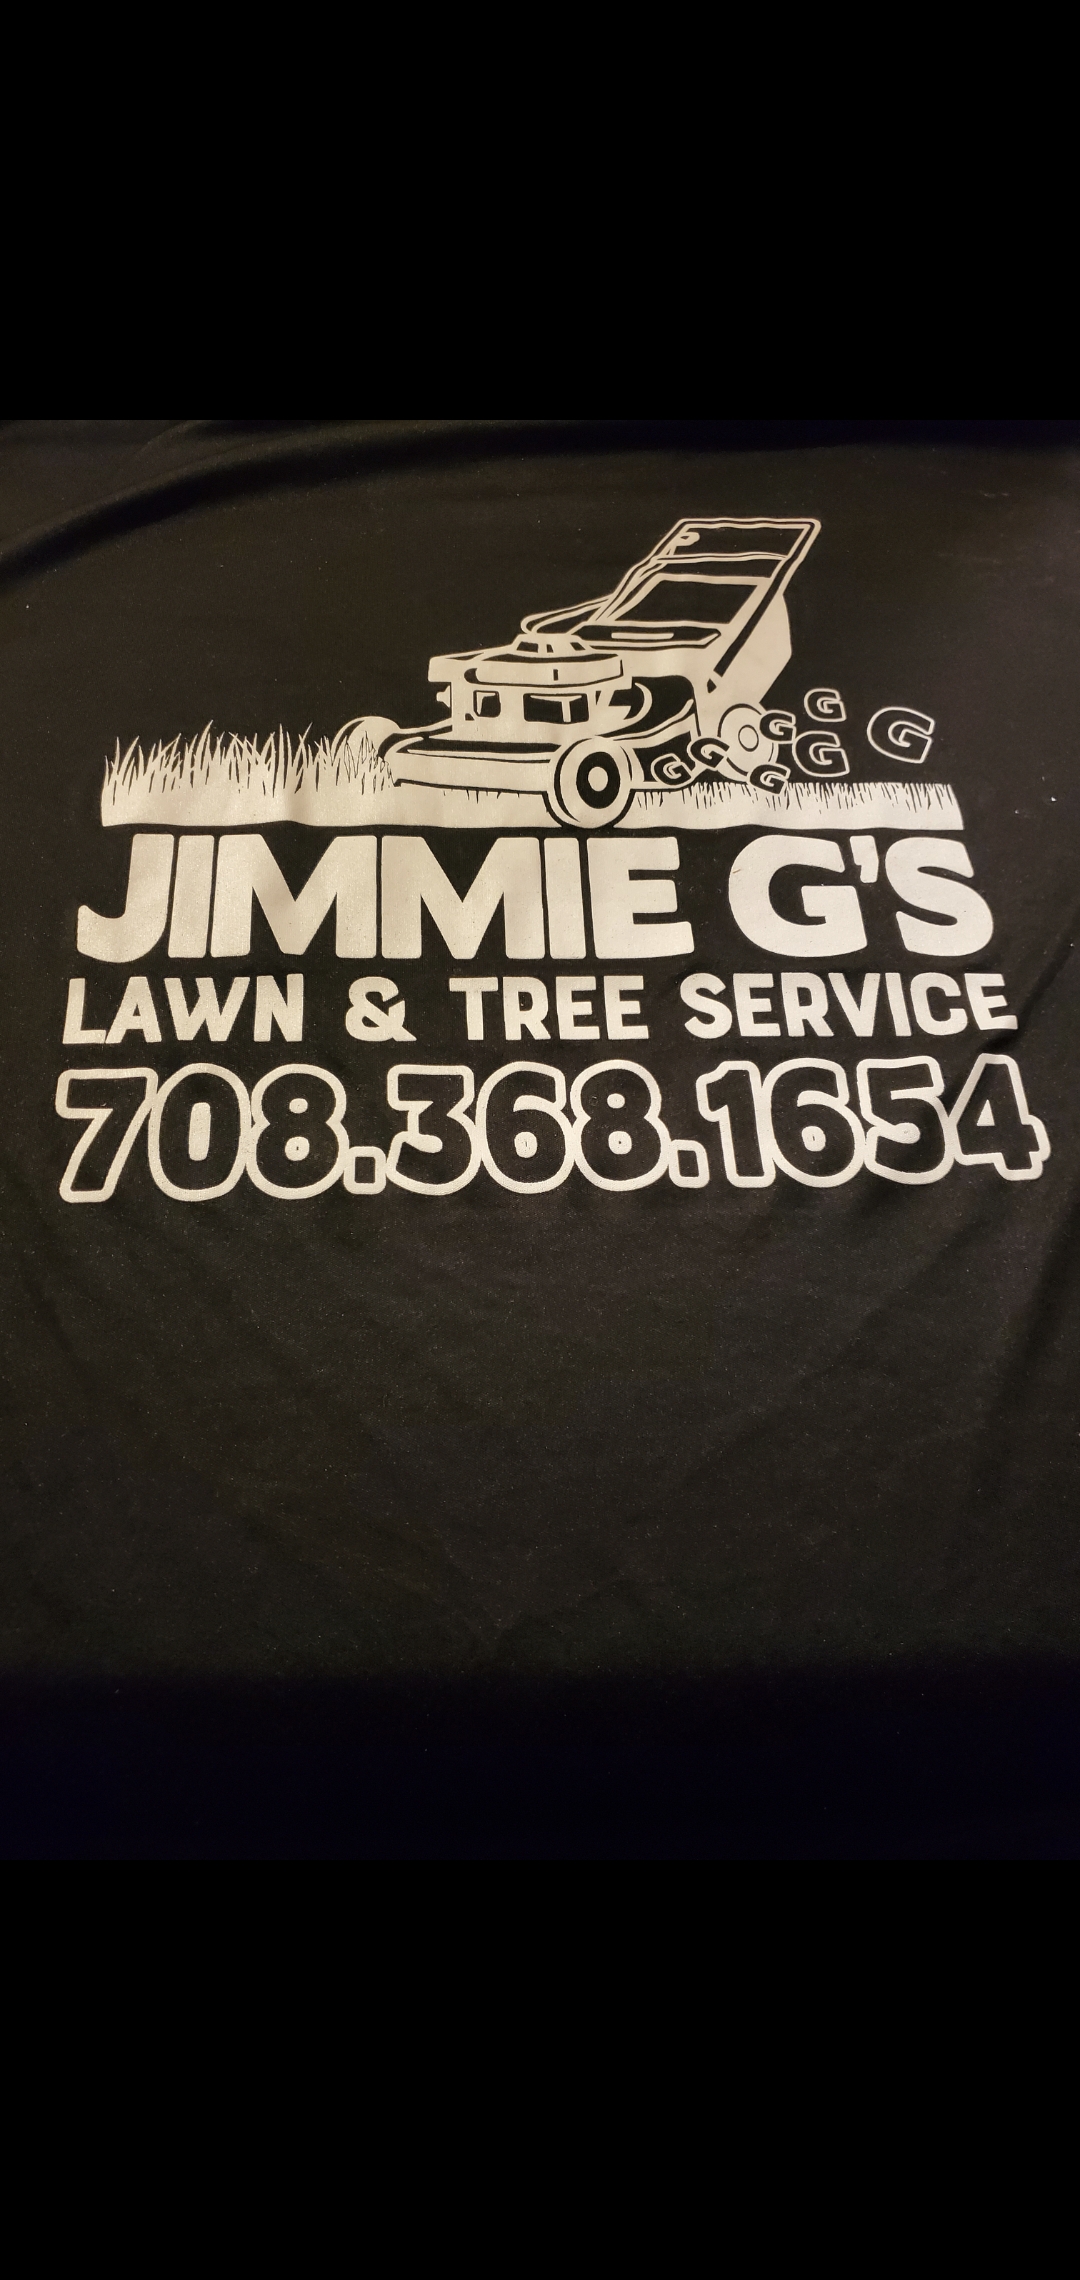 Jimmie G's Lawn and Tree Service Logo